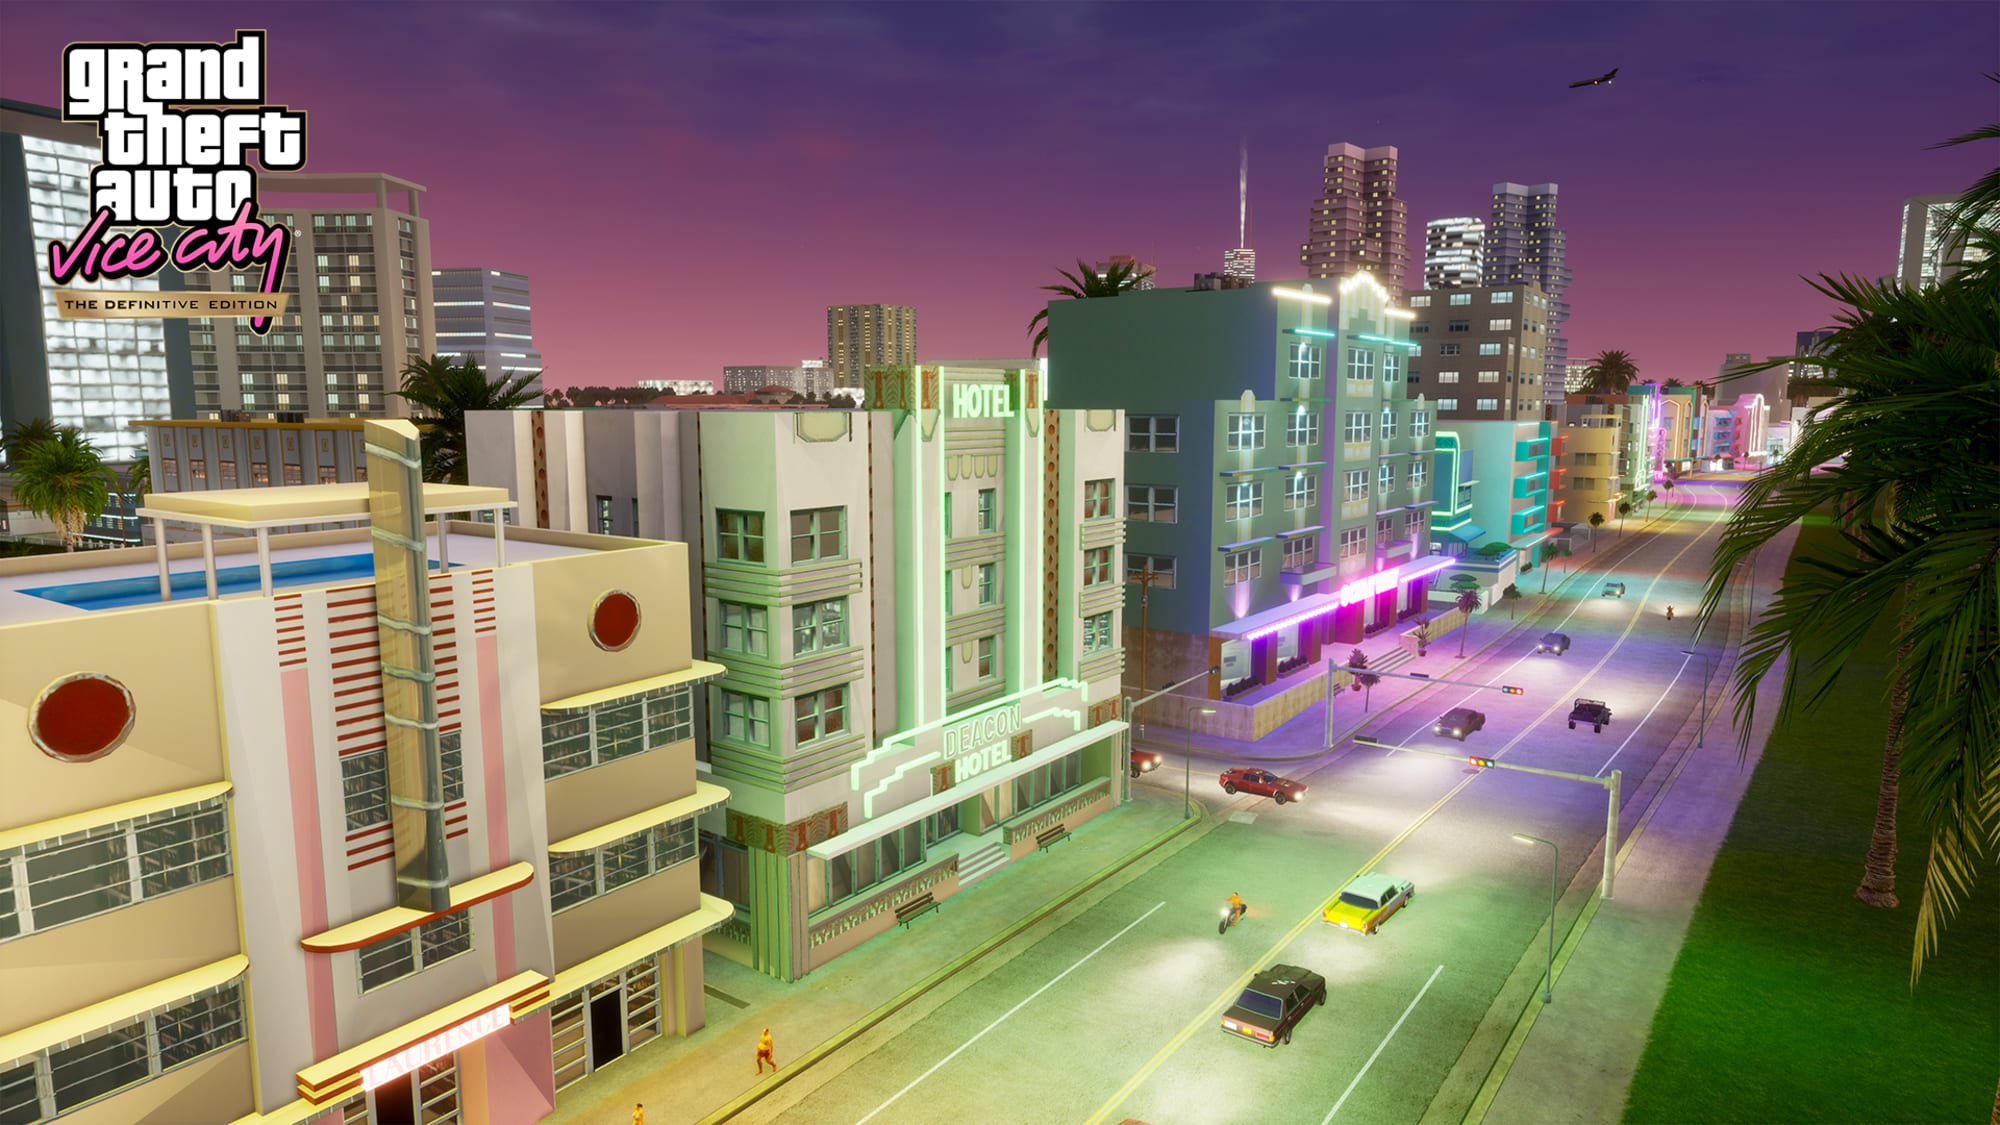 Verwisselbaar frequentie spanning GTA: Vice City - Definitive Edition cheats for Nintendo Switch